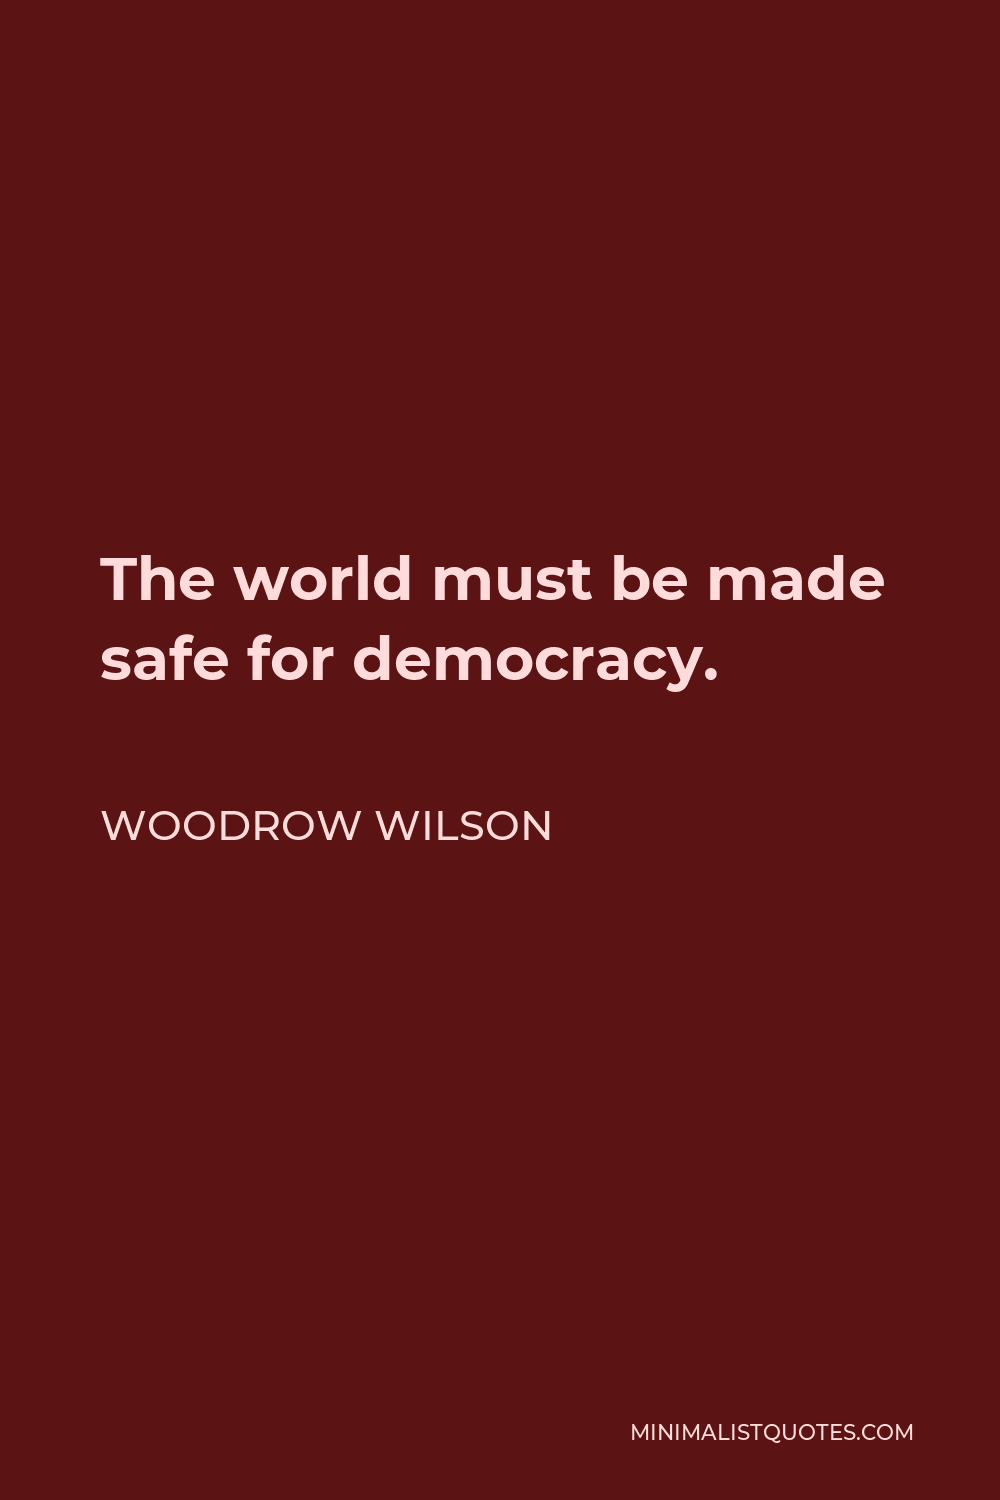 Woodrow Wilson Quote - The world must be made safe for democracy.